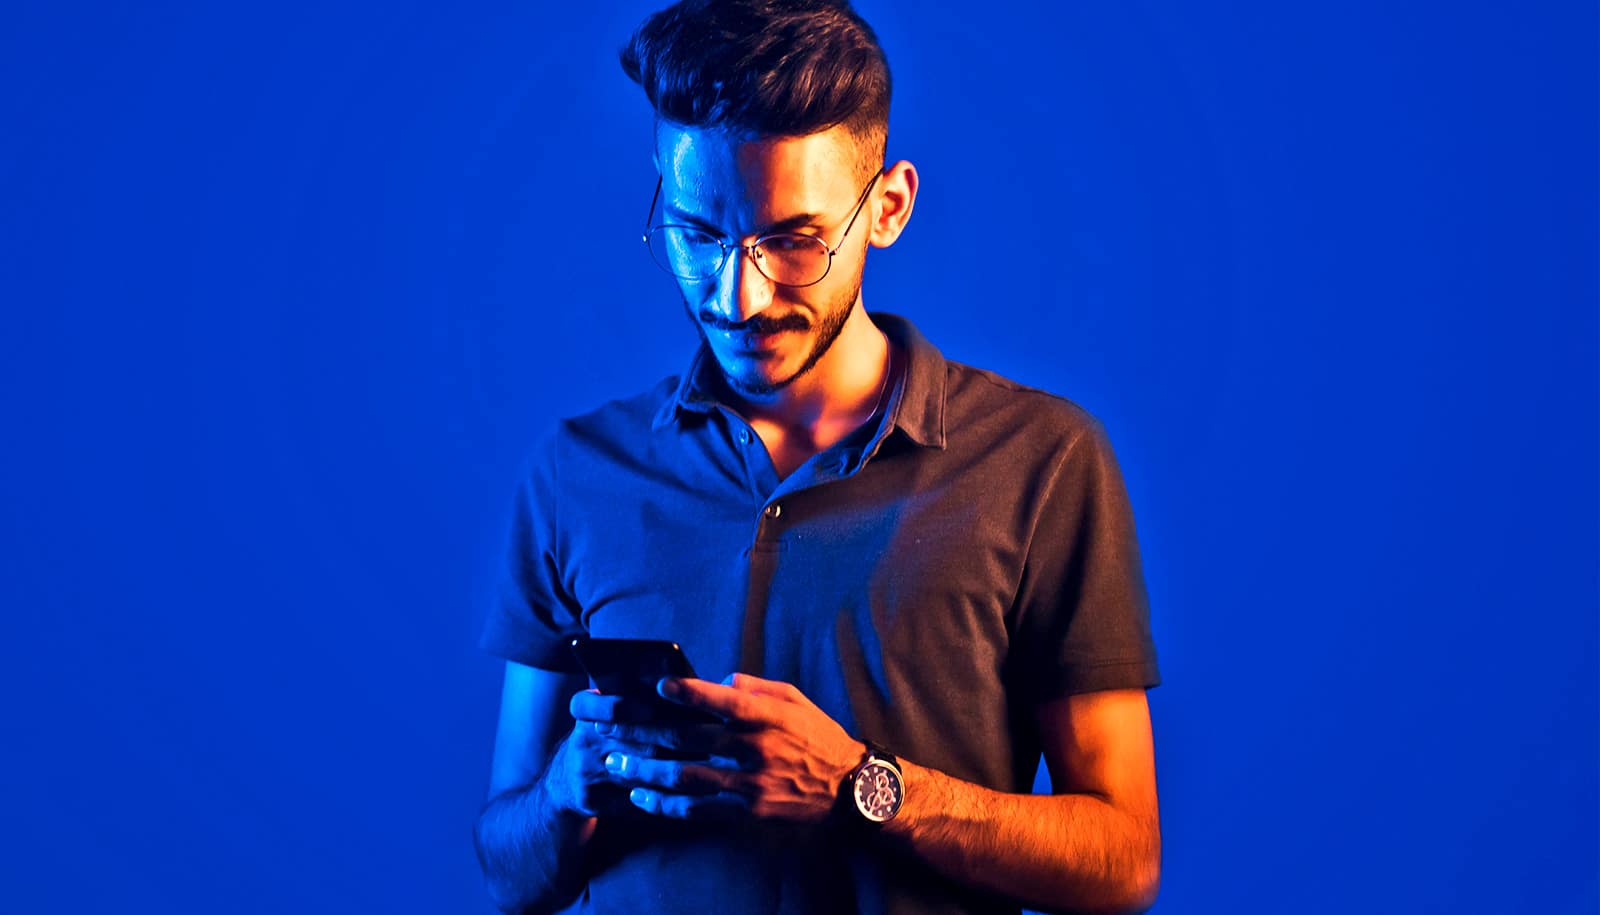 A man reads his phone while blue and orange light illuminate each half of his body.